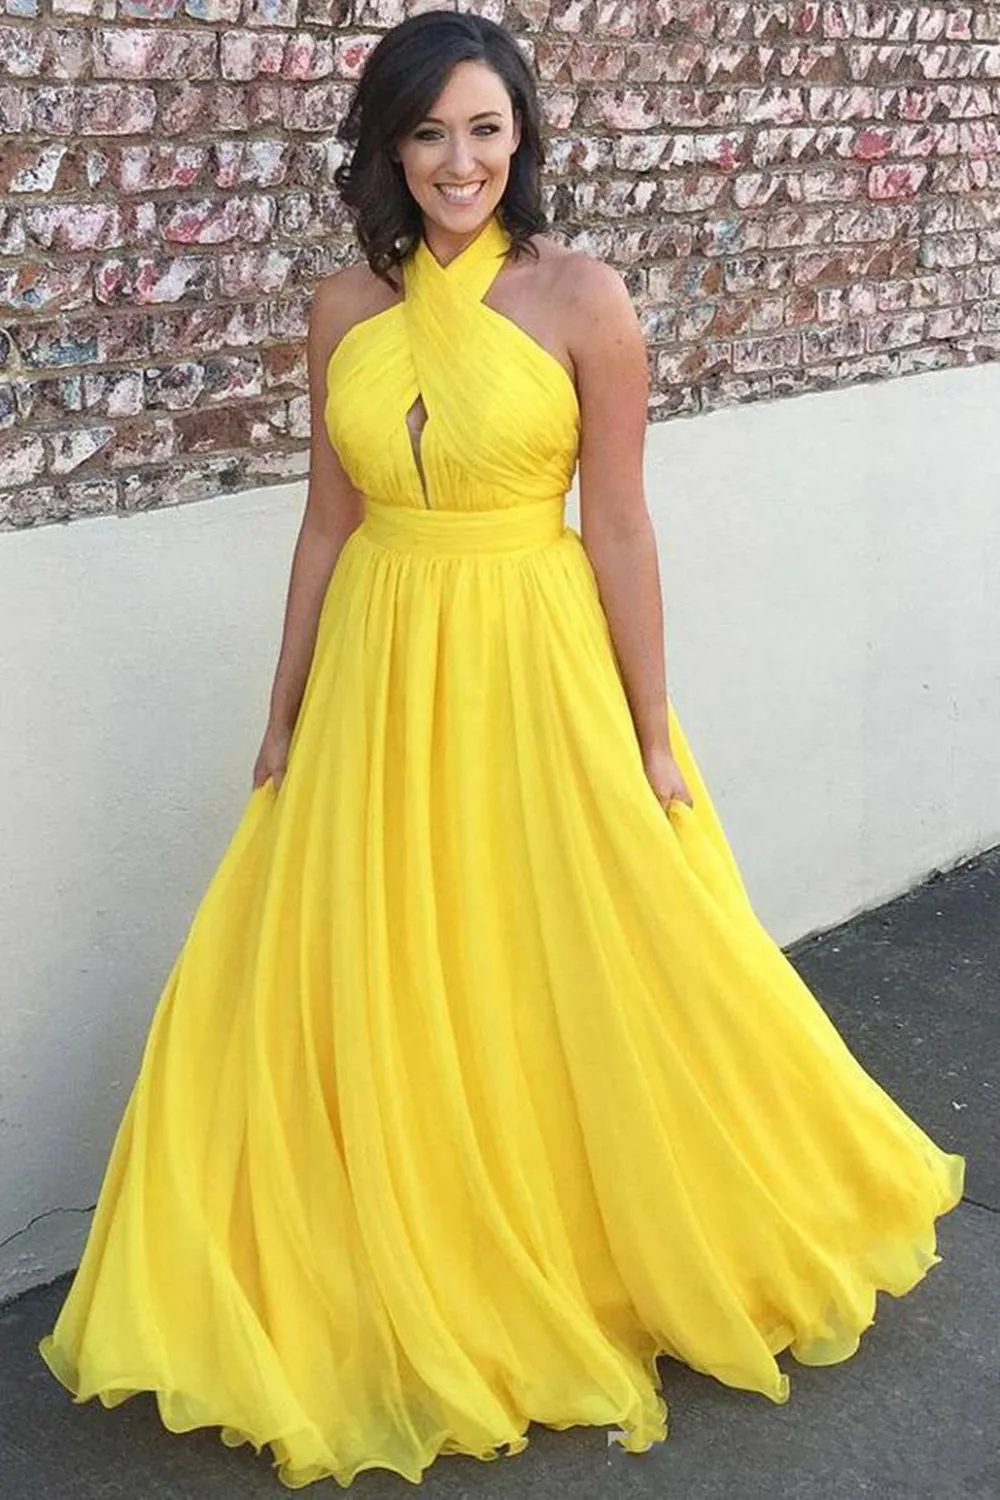 Ball Gown Yellow Chiffon Bridesmaid Party Dresses Sexy Sleeveless Floor Lenght High Neck Backless Prom Evening Guest Gowns